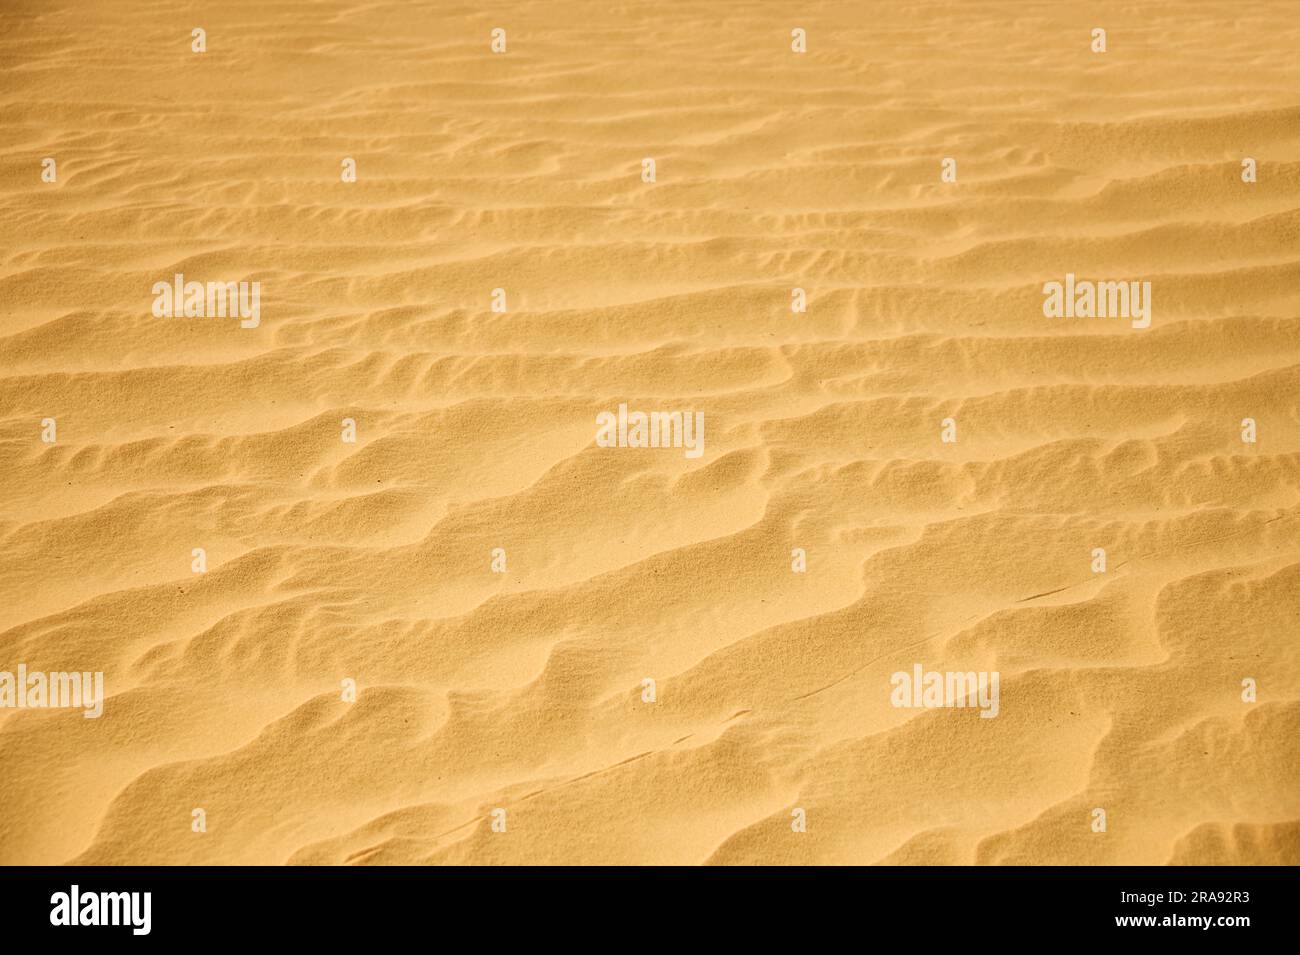 Detail view of the sand in the desert or at the beach, to use as background Stock Photo